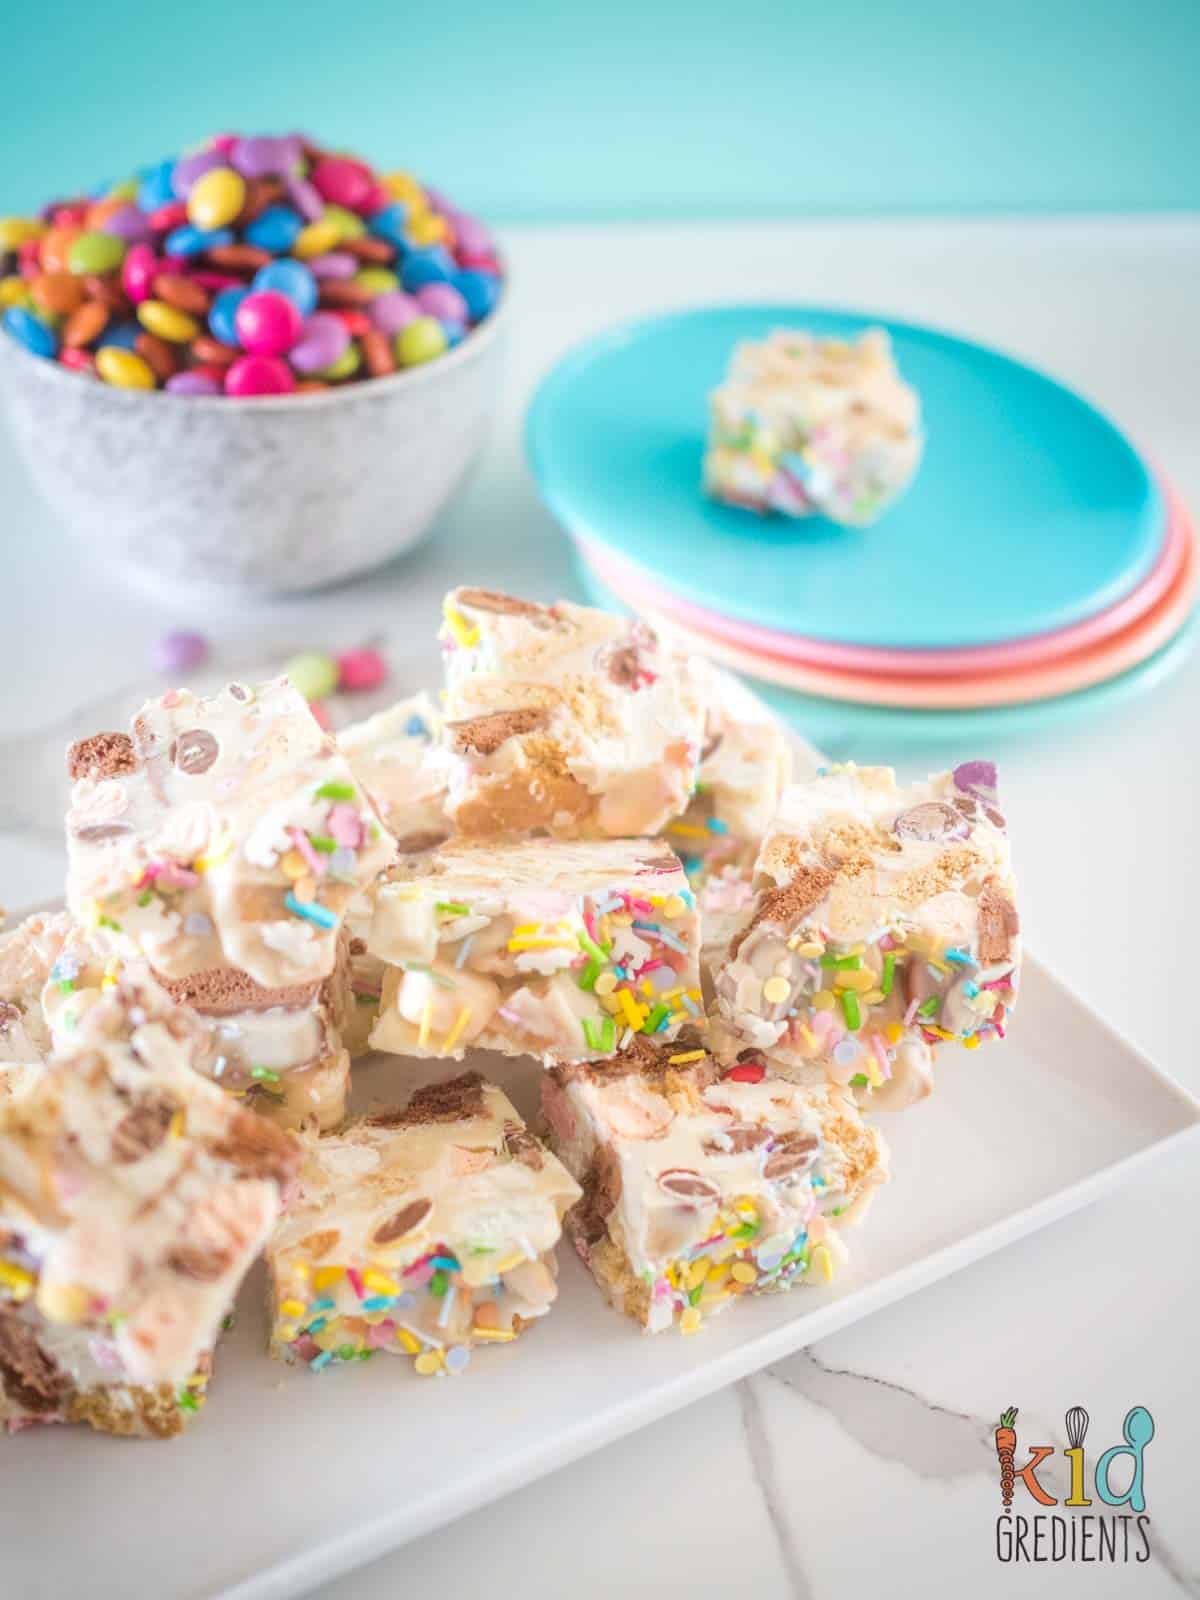 white chocolate rocky road chopped up on a platter